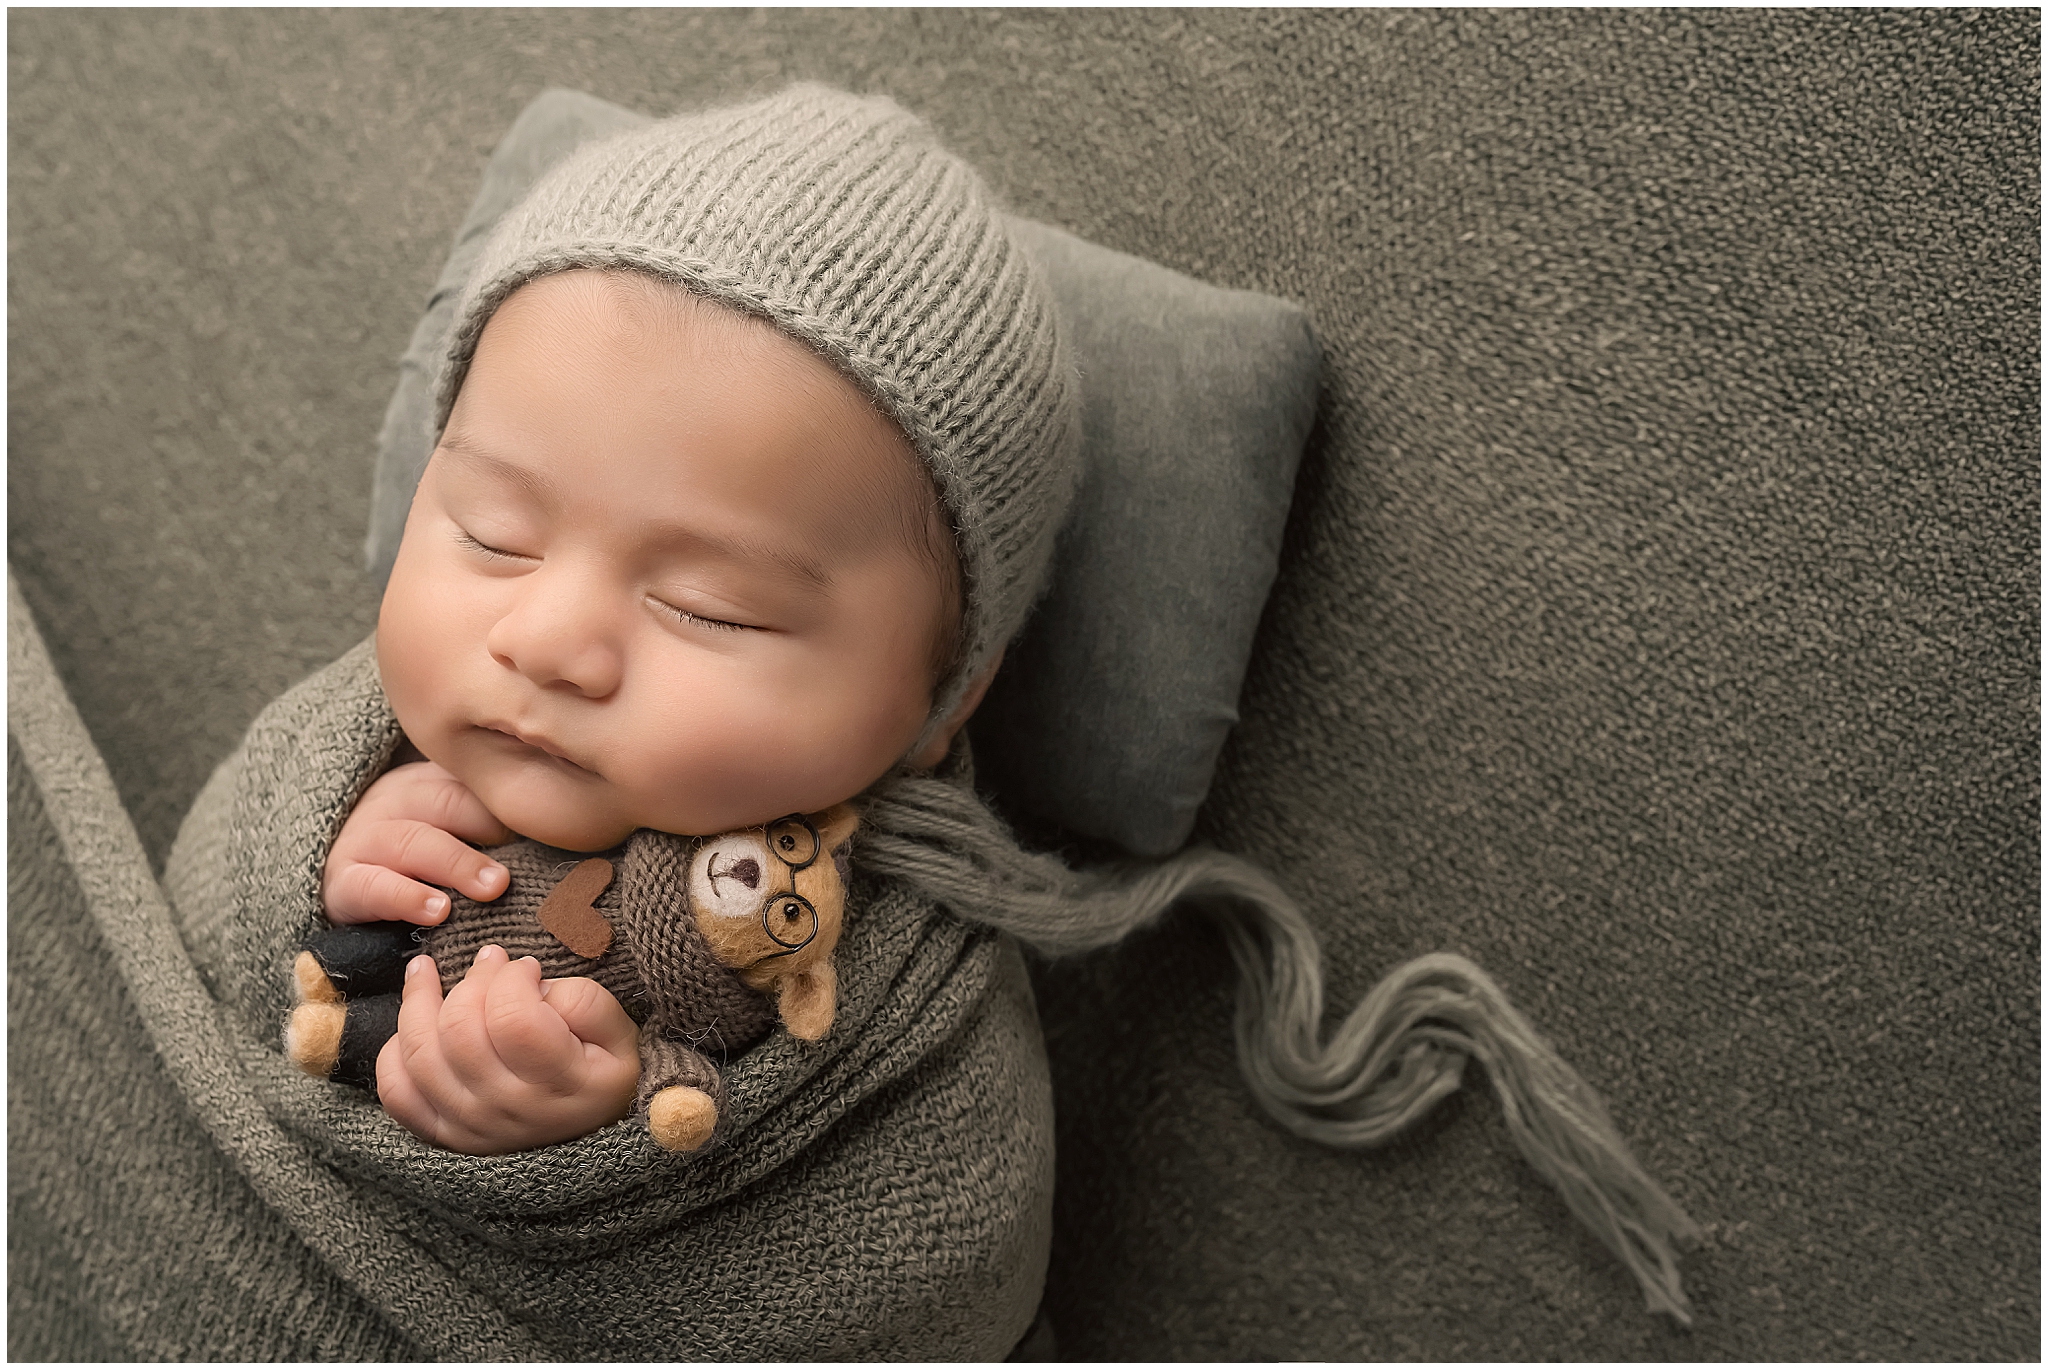 baby holding bear during newborn photography session in london ontario